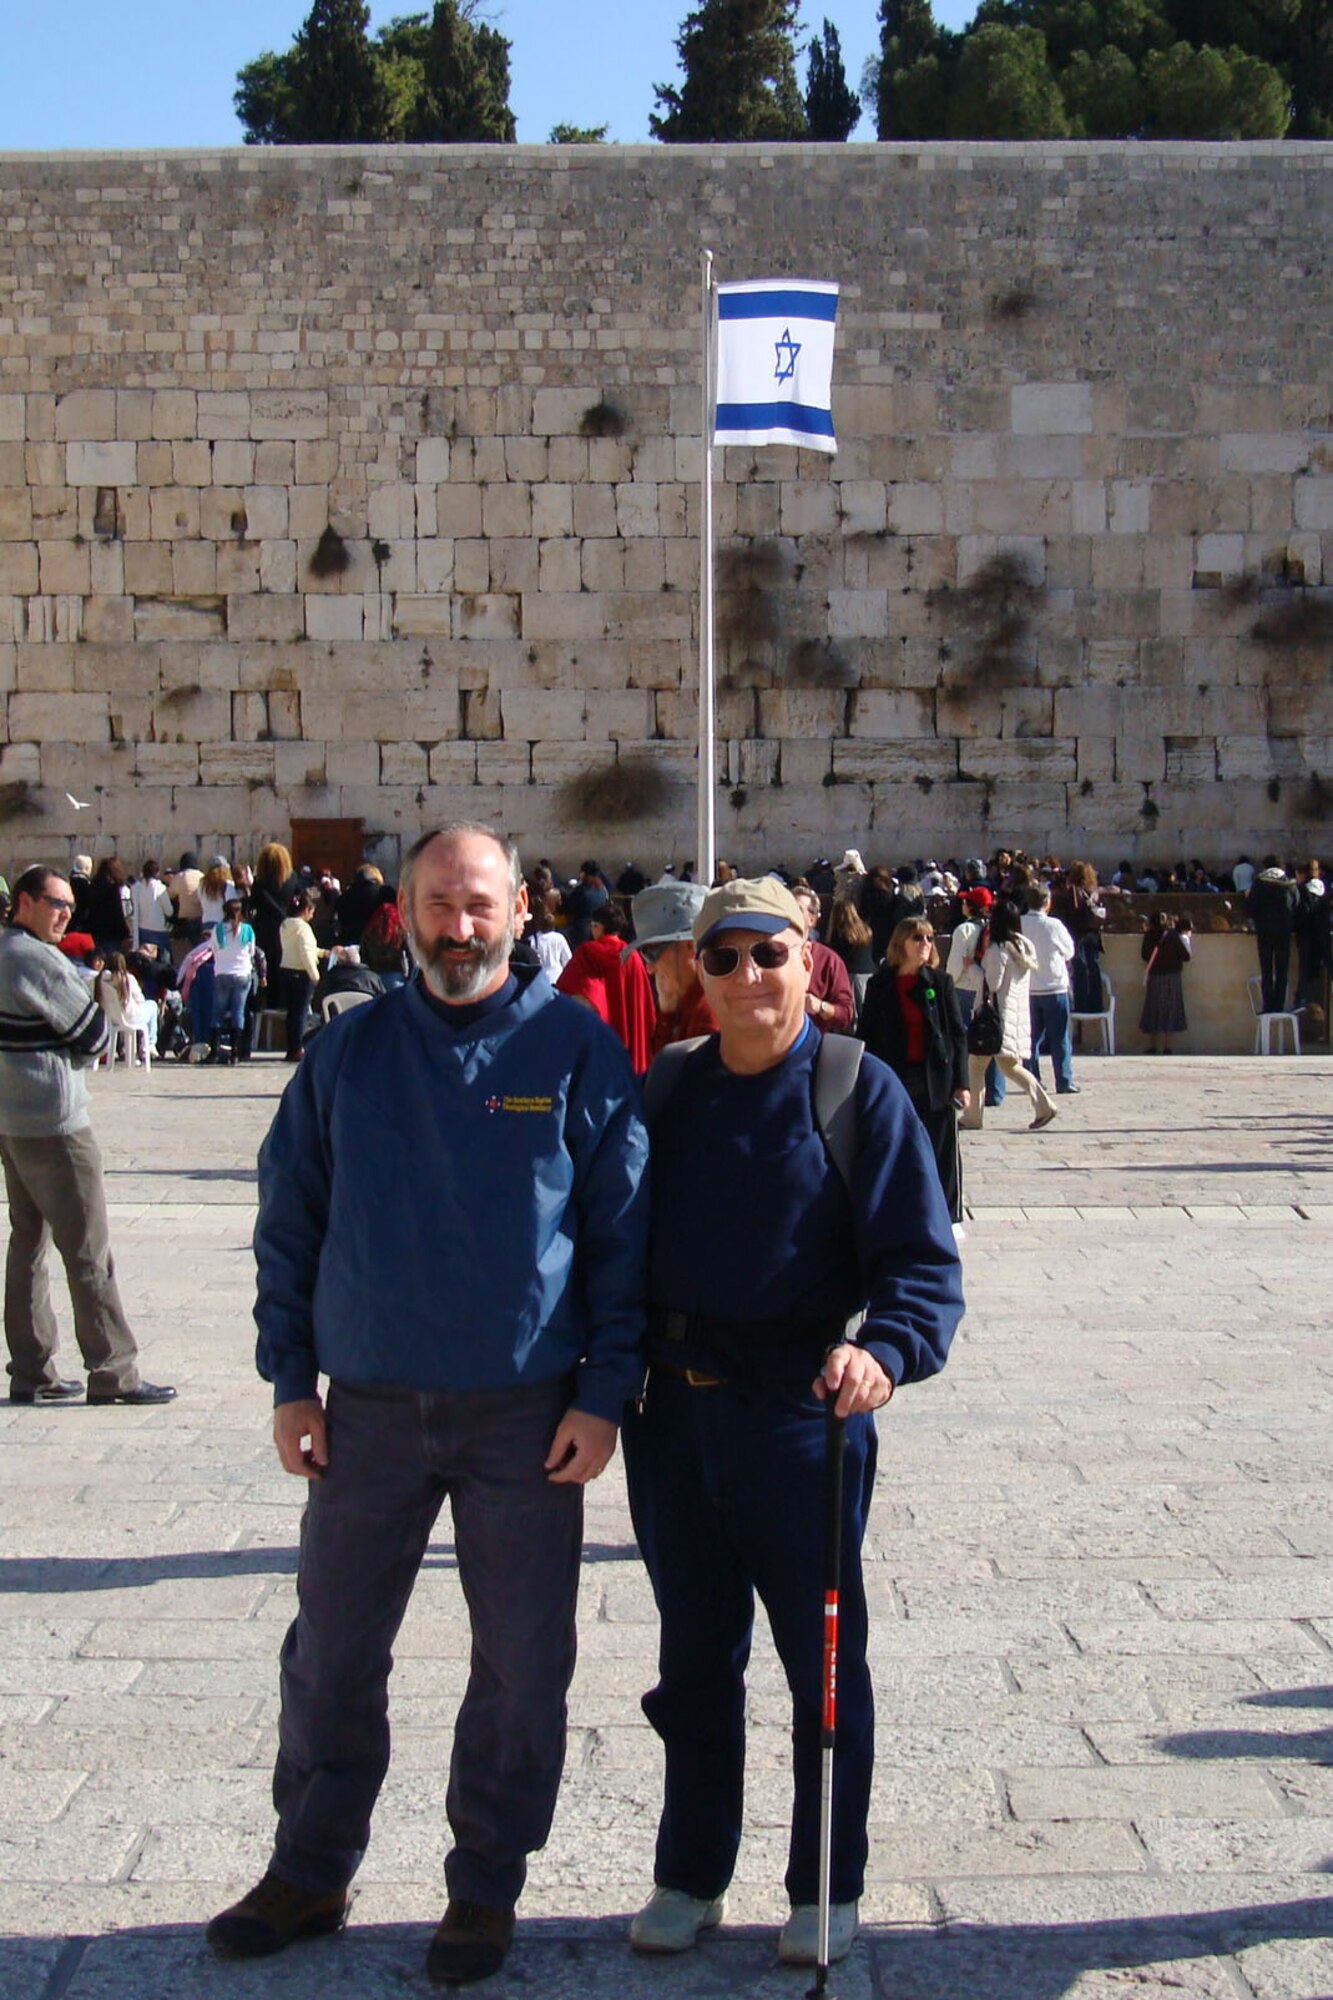 Jim Johnson and his son-in-law Tom Cole of Memphis, Ind., stand near
the Western Wall of Herod's Temple in Jerusalem. (Photo provided)